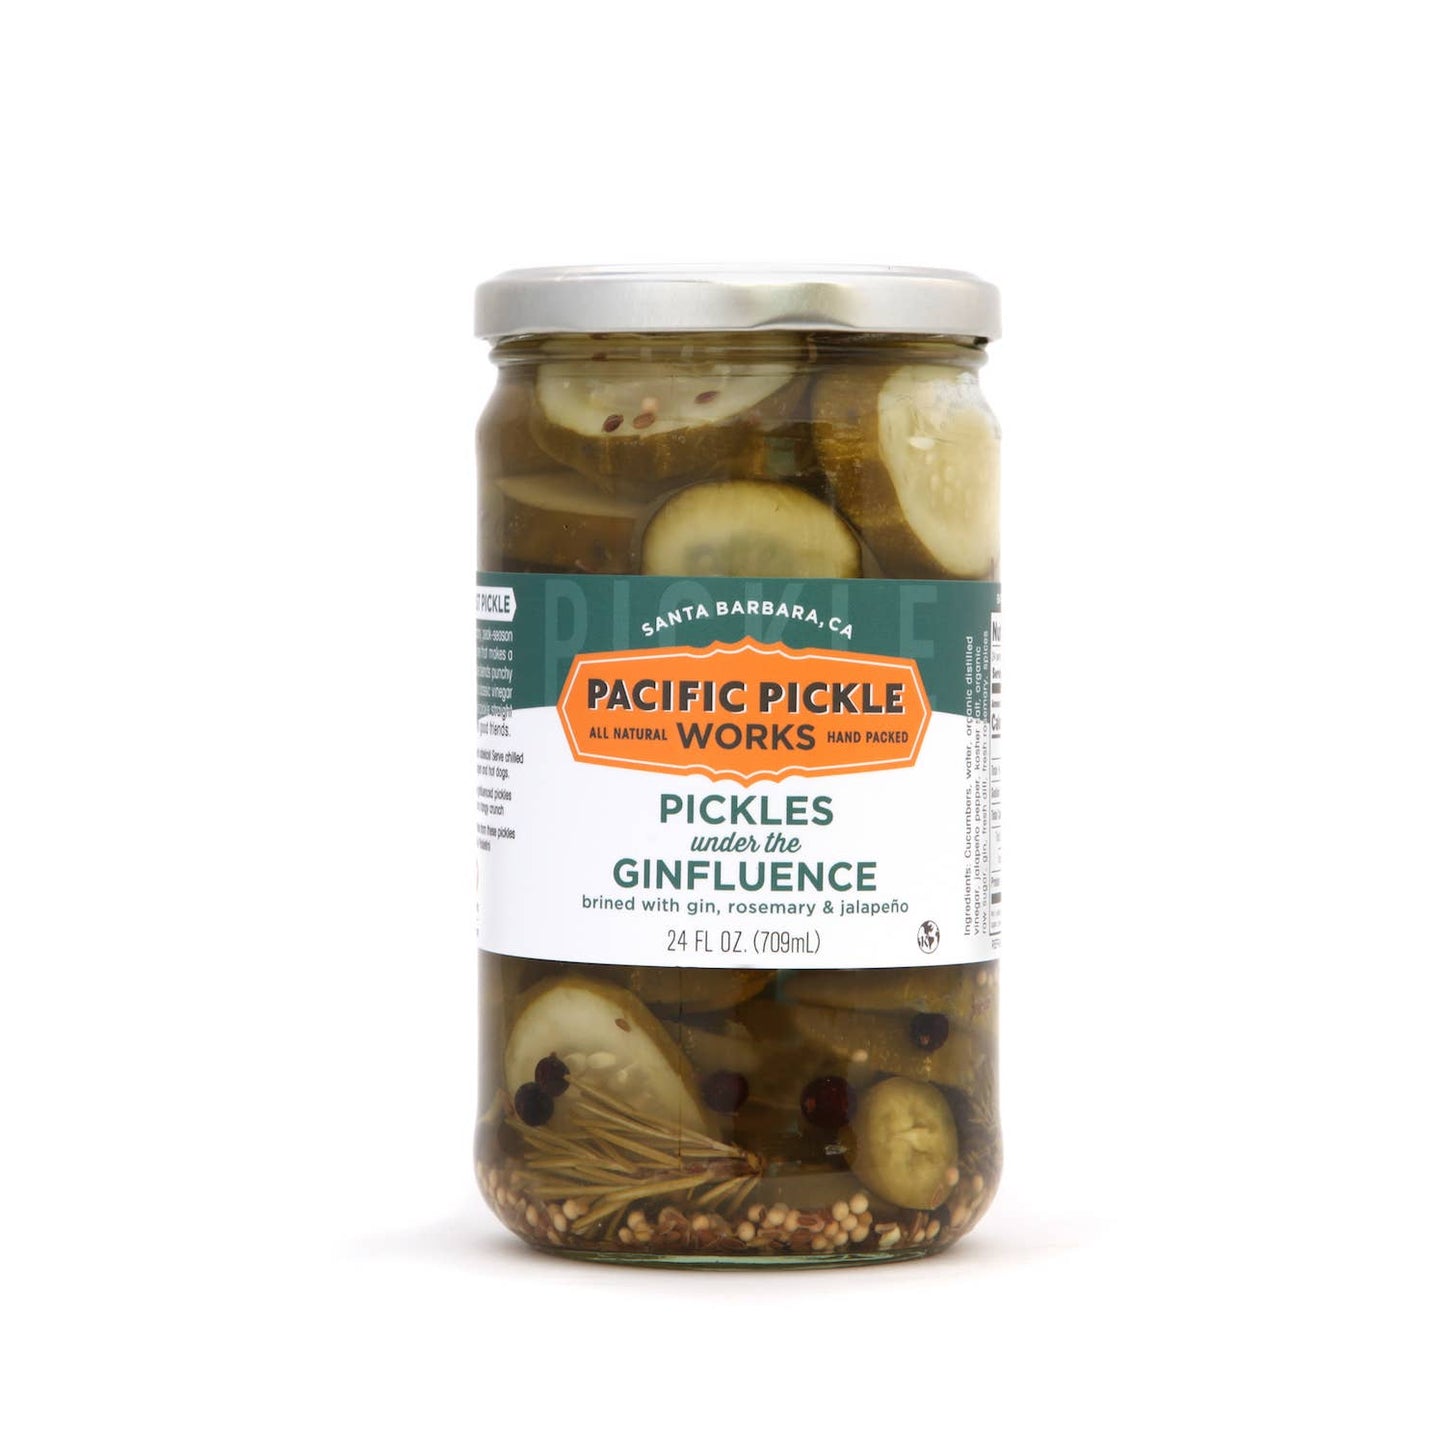 Pacific Pickle Works - Pickles Under The Ginfluence - Pickles brined with gin